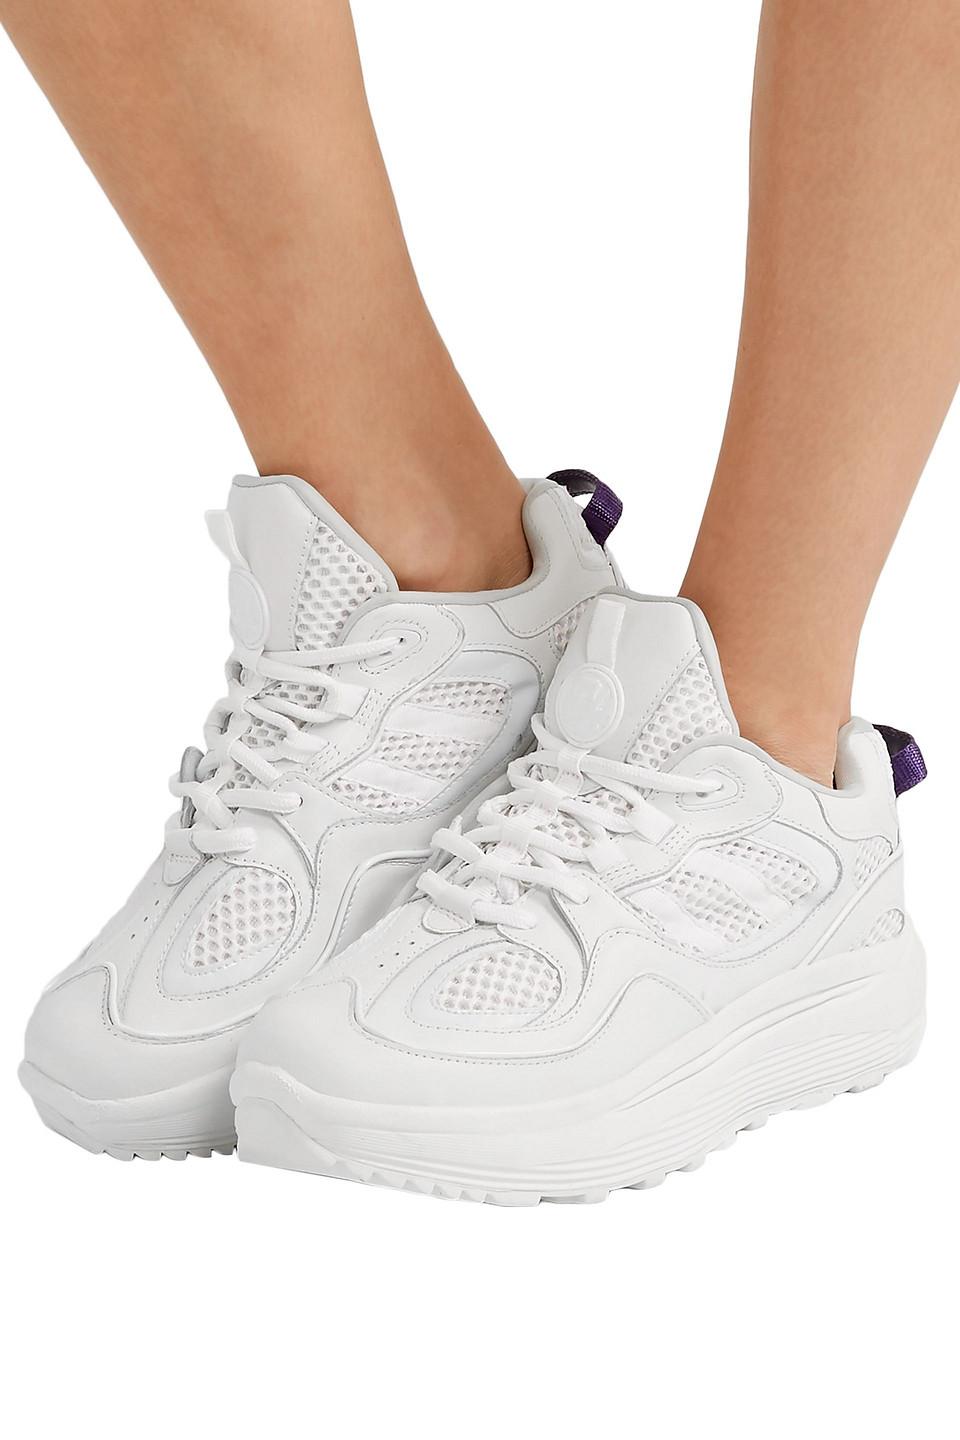 Eytys Jet Turbo Mesh, Smooth And Patent-leather Platform Sneakers in White  | Lyst